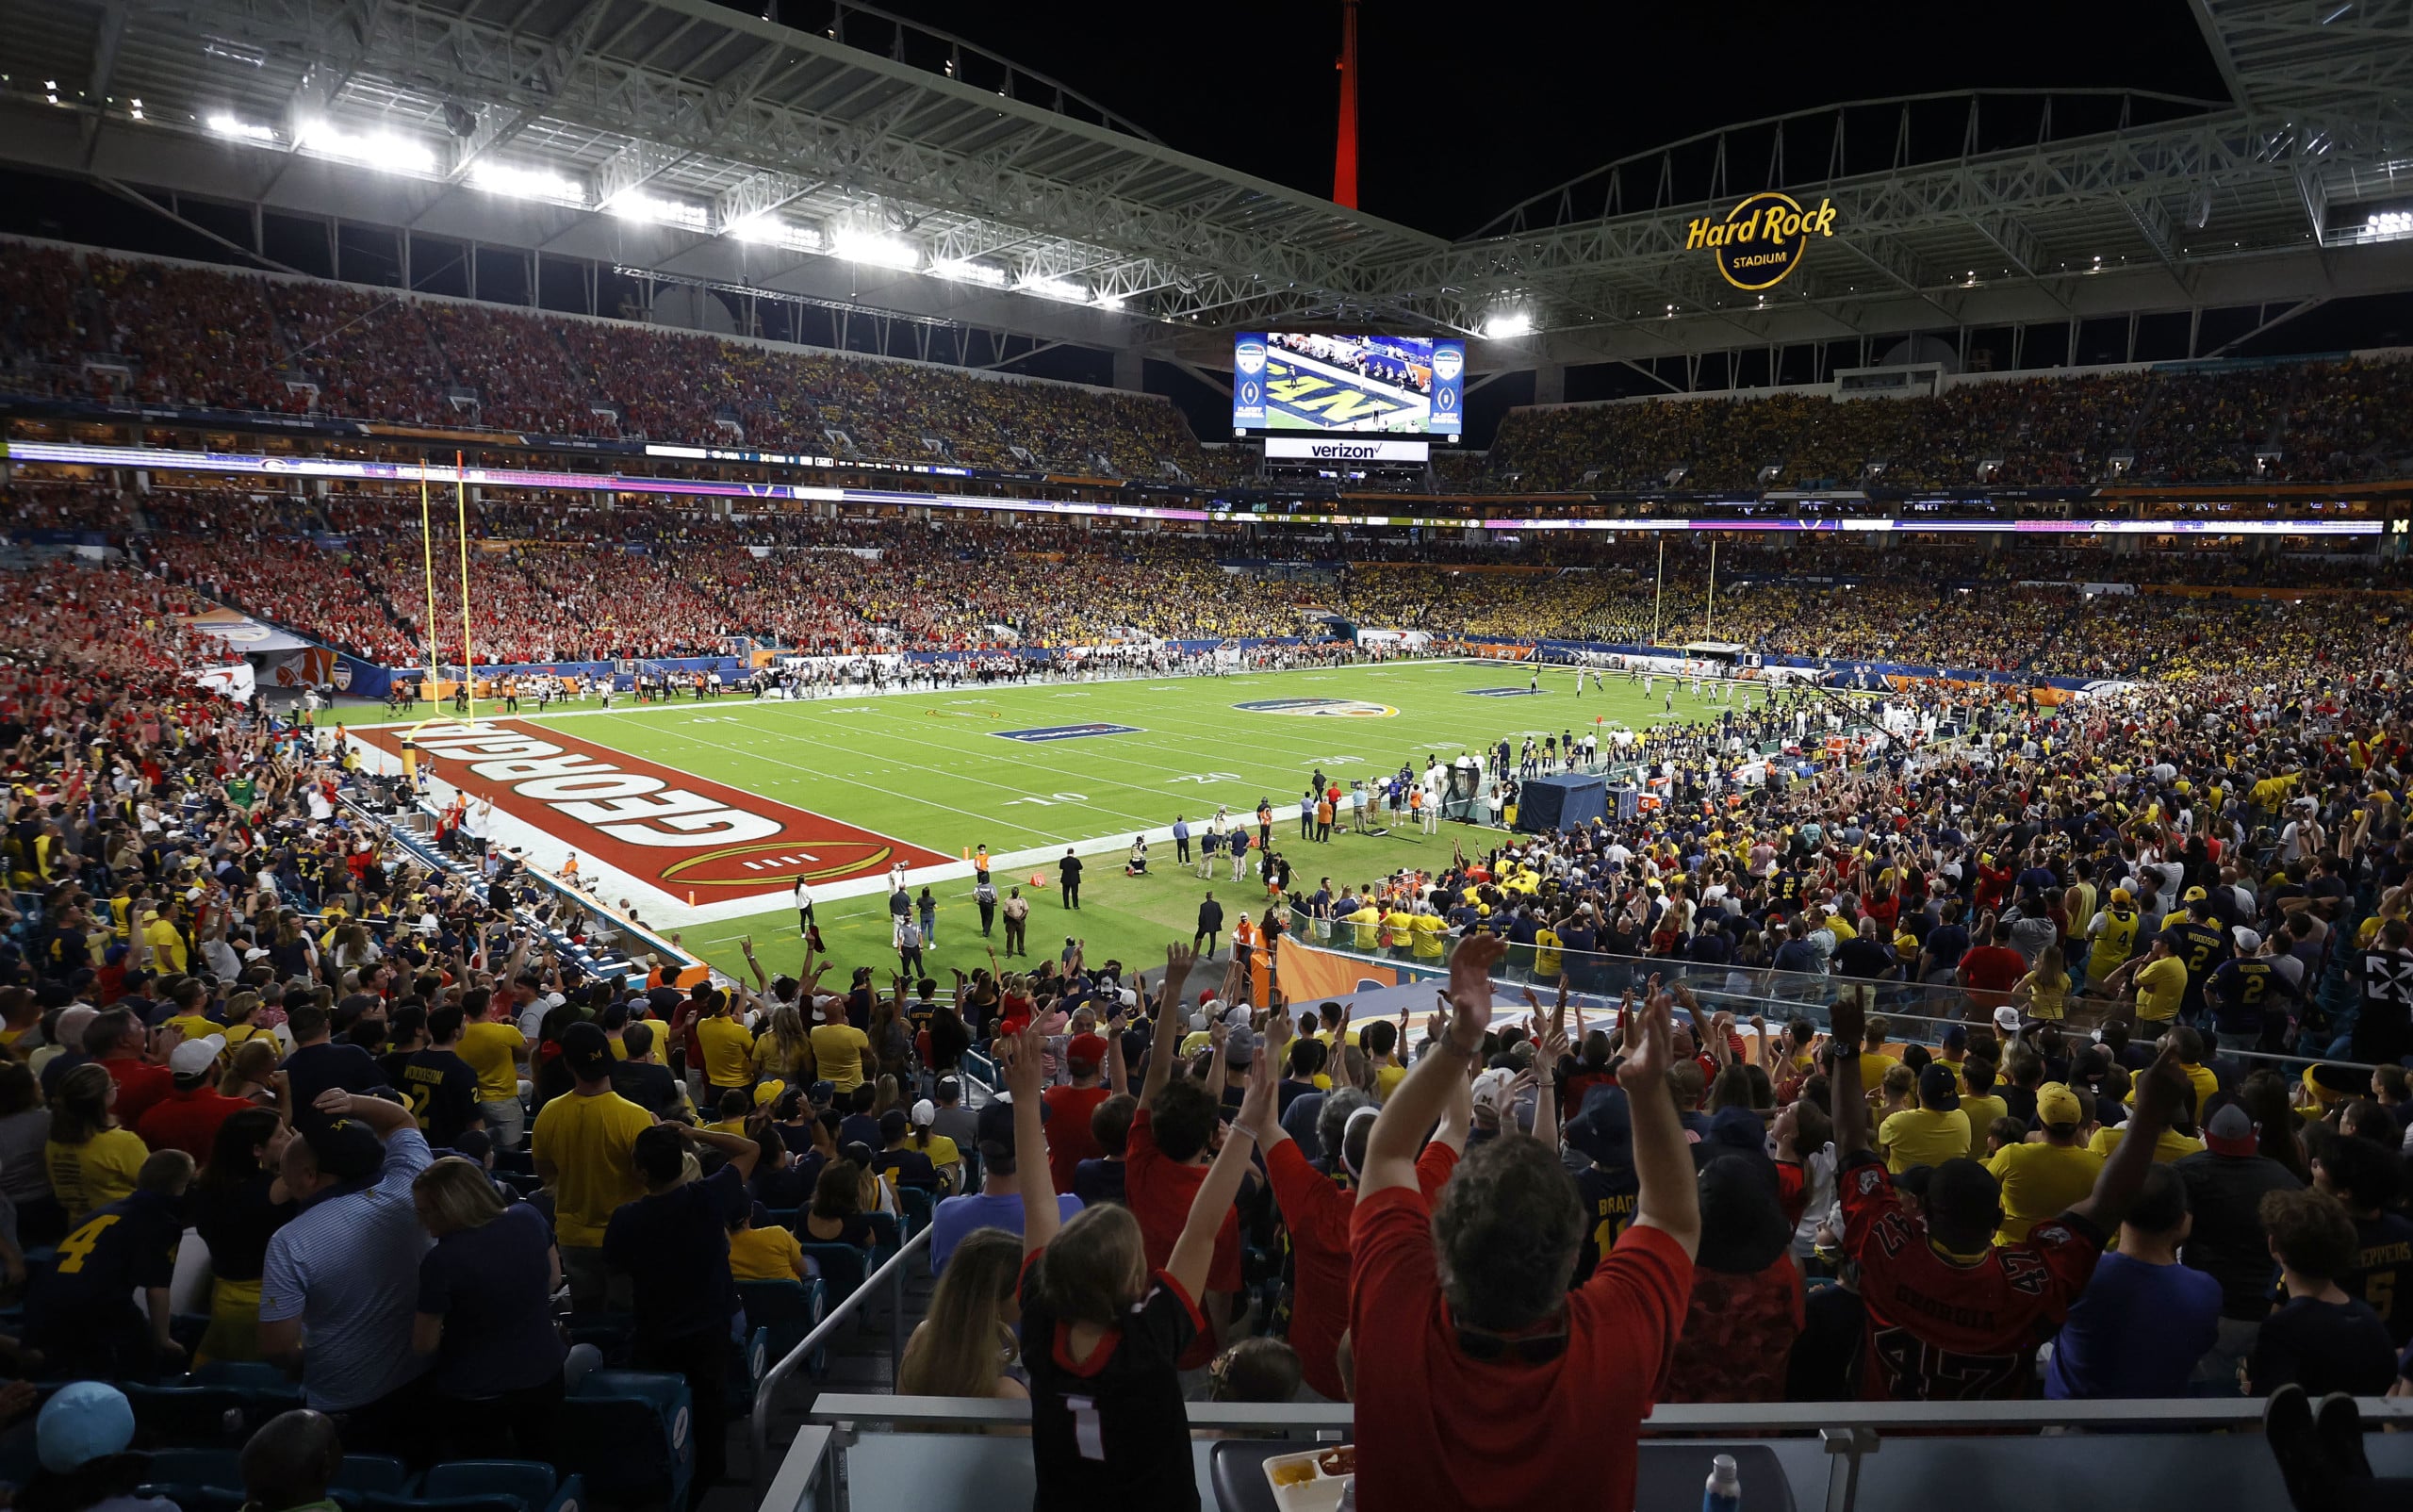 Fans cheer on players during match-up between Georgia and Michigan during 2021 Orange Bowl at Hard Rock Stadium